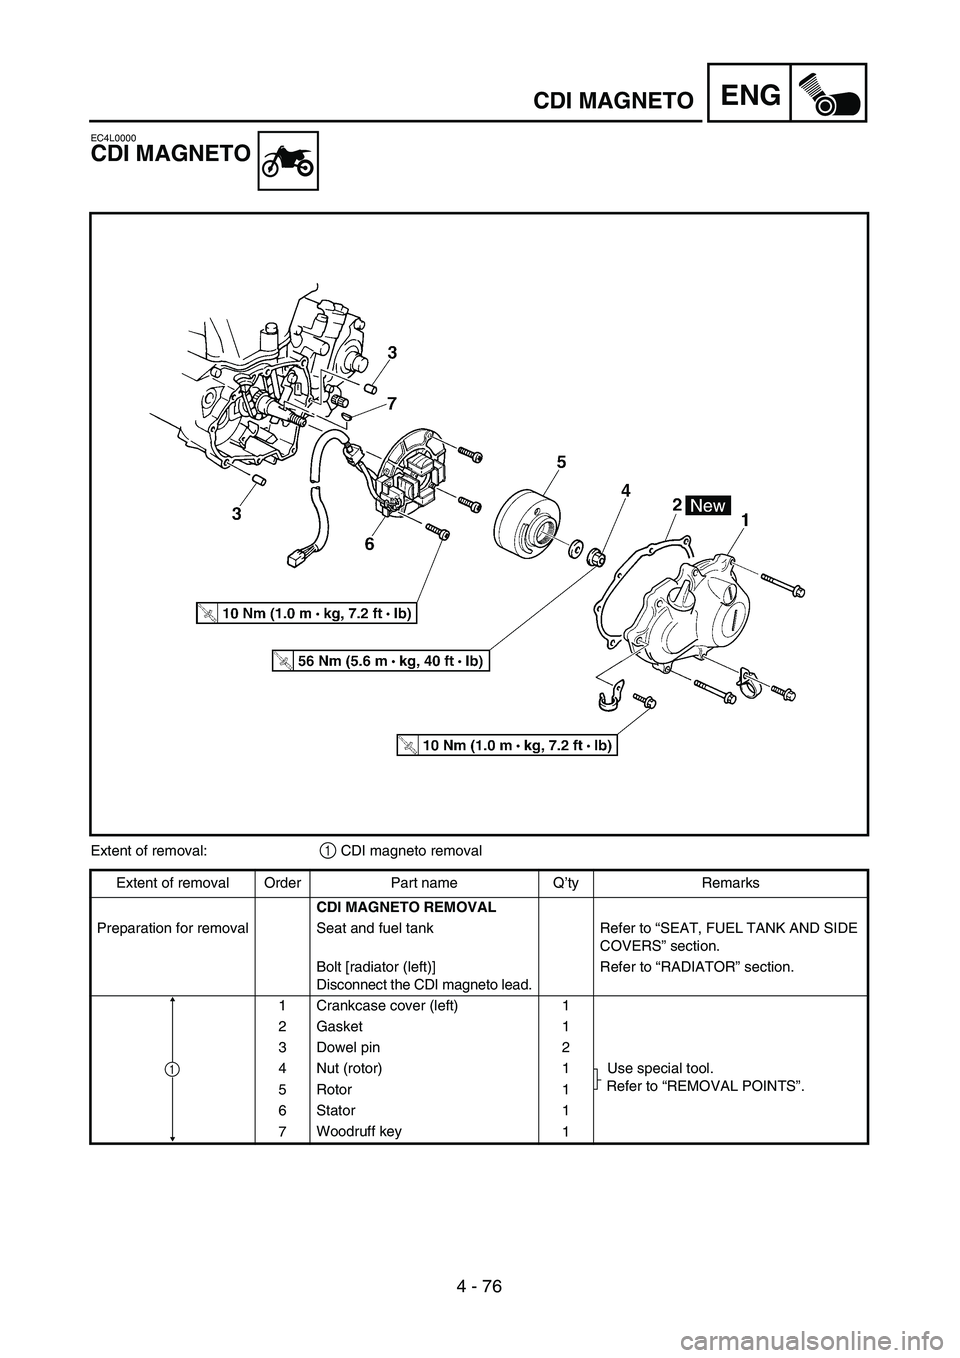 YAMAHA YZ450F 2004  Notices Demploi (in French) 4 - 76
ENGCDI MAGNETO
EC4L0000
CDI MAGNETO
Extent of removal:1 CDI magneto removal
Extent of removal Order Part name Q’ty Remarks
CDI MAGNETO REMOVAL
Preparation for removal Seat and fuel tank Refer